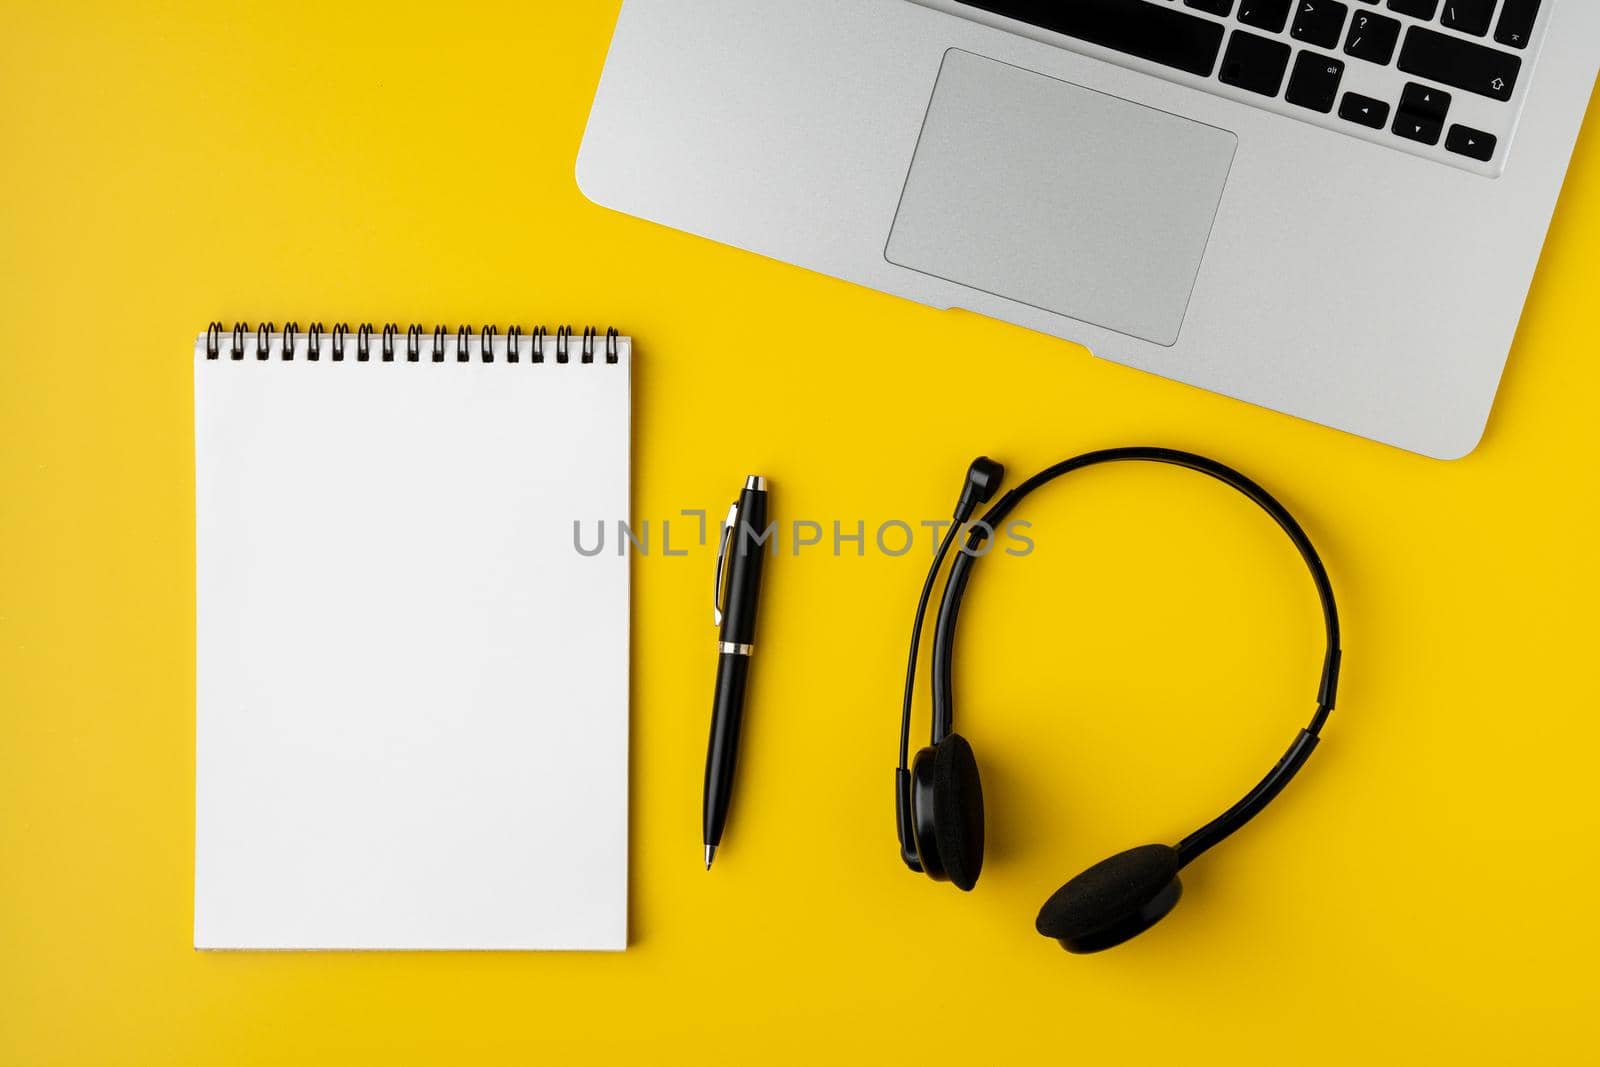 Metallic laptop keyboard, black wireless headset with mic, spiral empty notebook and pen on yellow background. Concept of modern workspace, overhead, horizontal